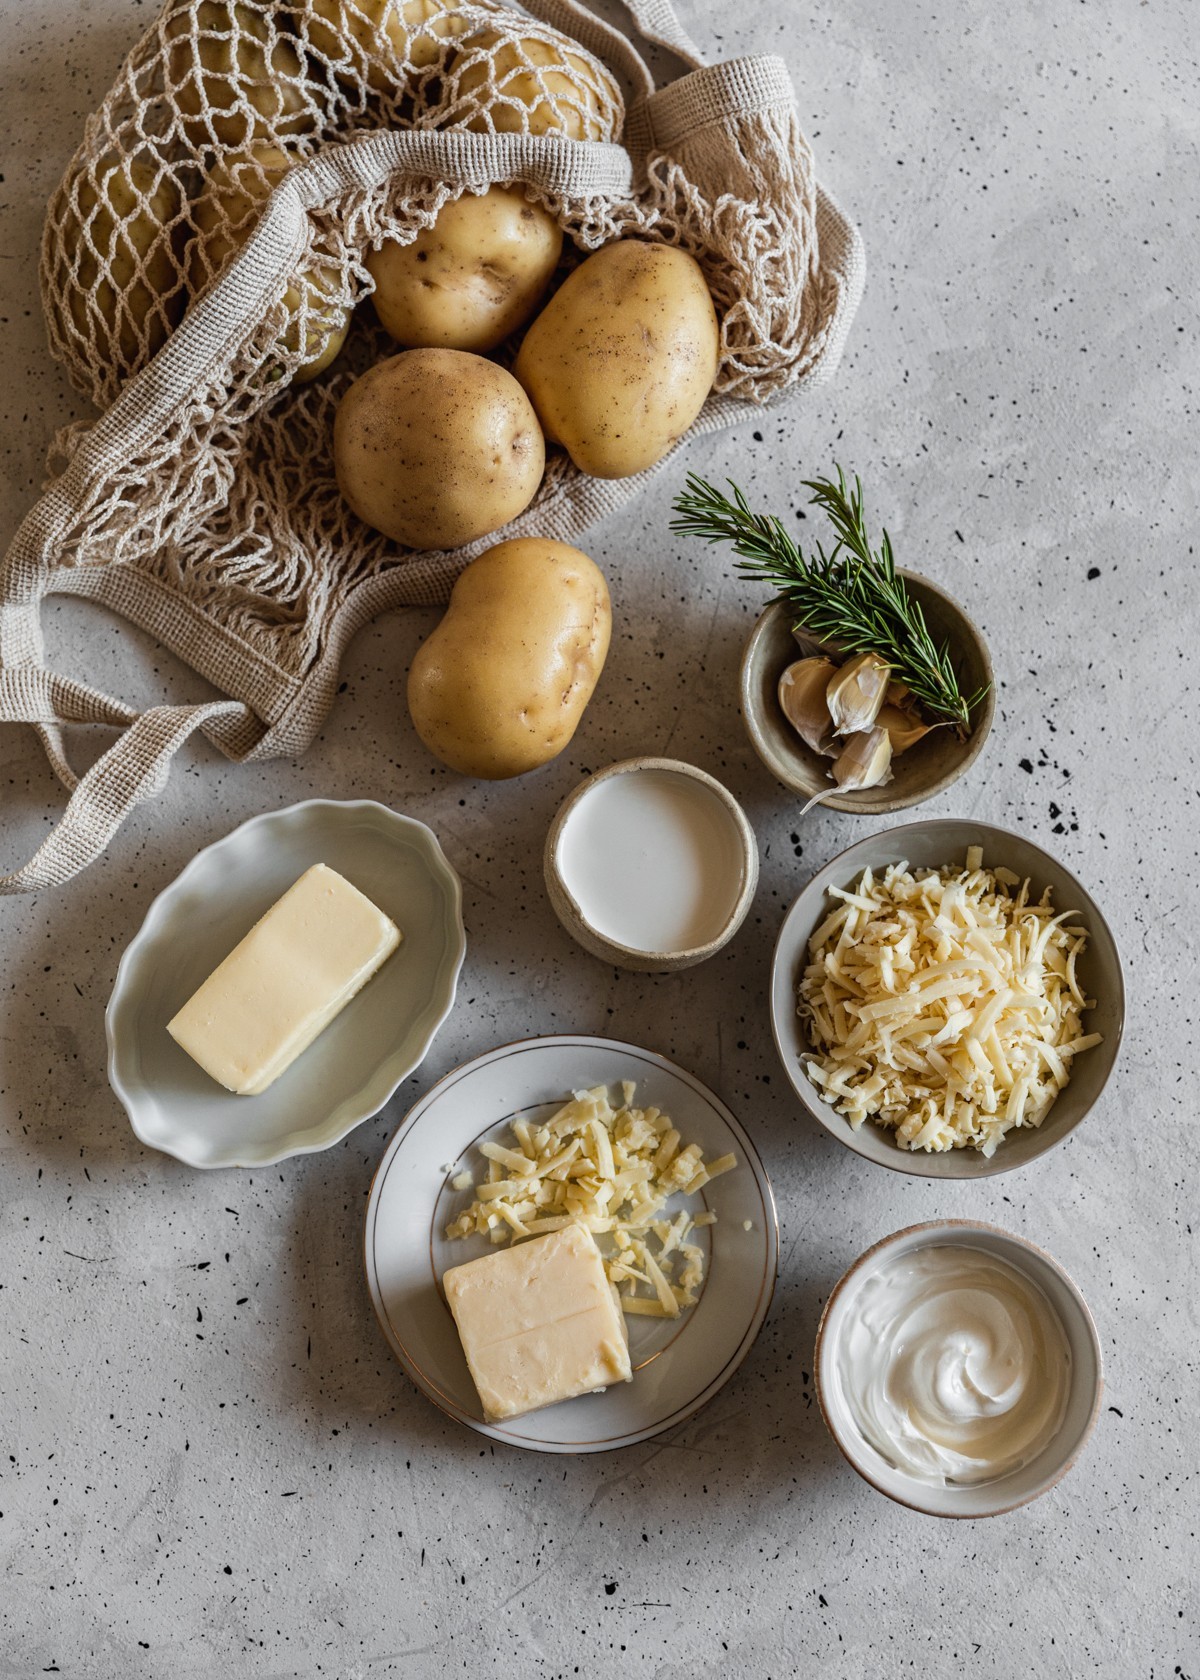 An overhead image of ingredients for cheddar mashed potatoes: a cloth bag of Yukon gold potatoes, a grey bowl of cheese, a white bowl with garlic and rosemary, a white plate with butter, and a white bowl of creme fraiche on a grey table.